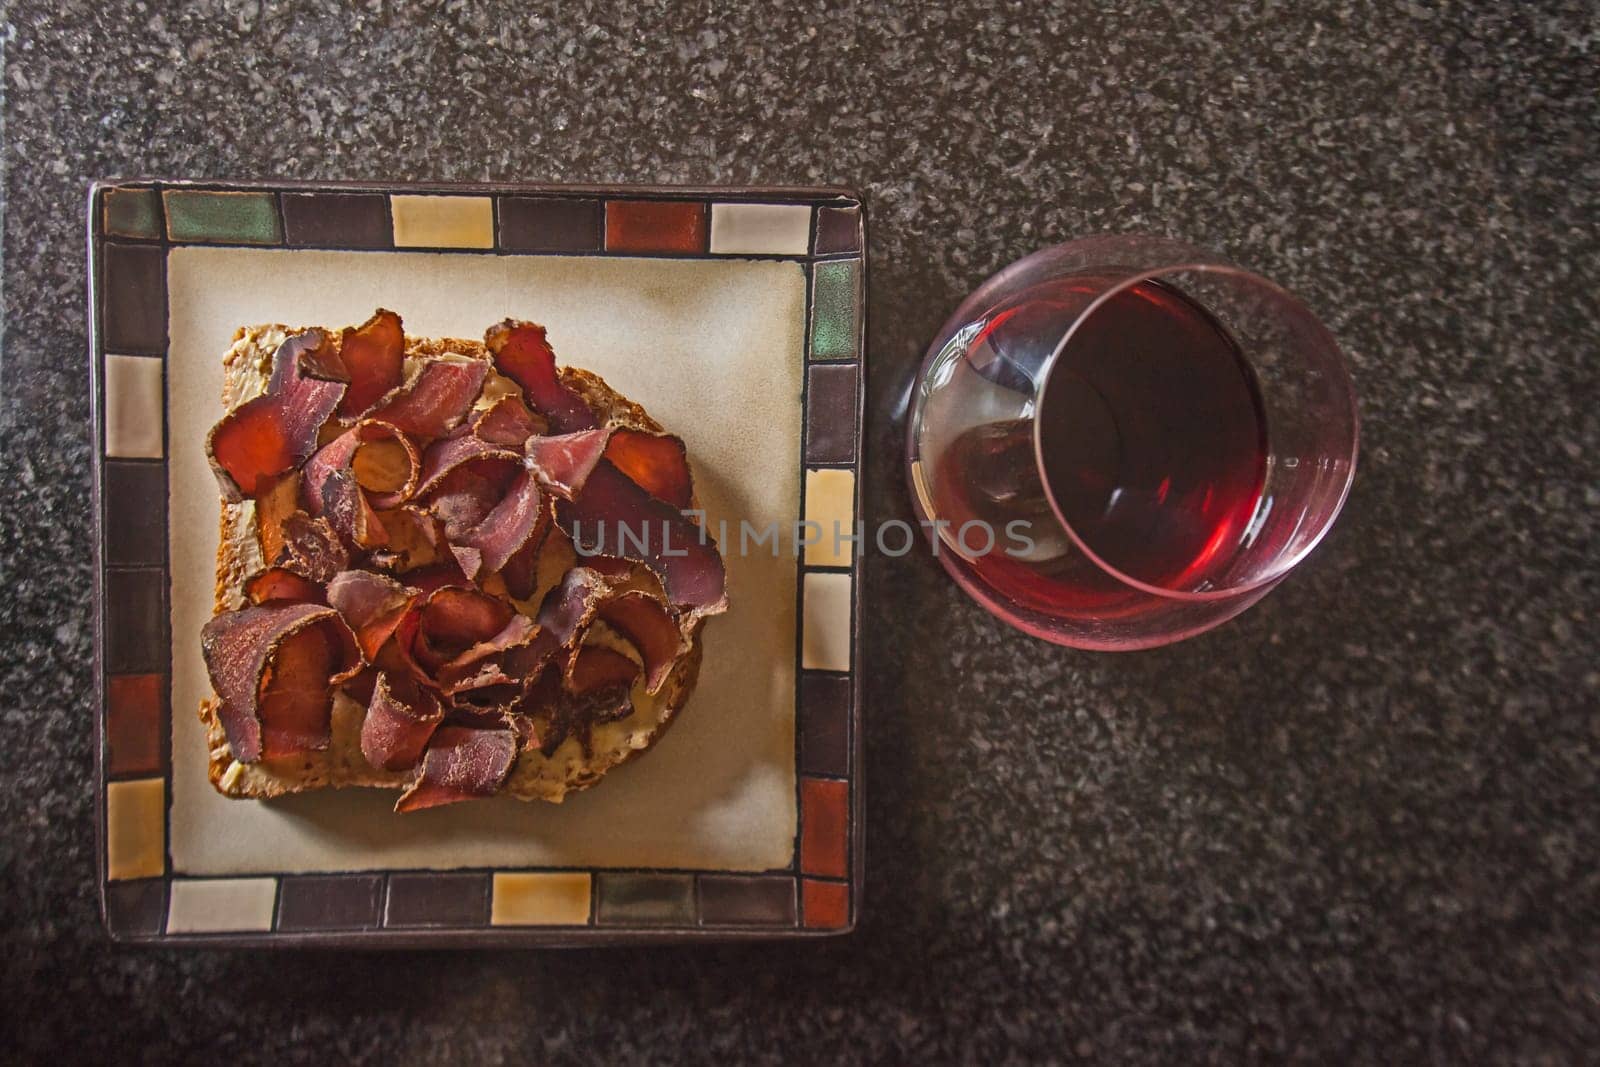 Sliced Biltong on bread and red wine 14406 by kobus_peche